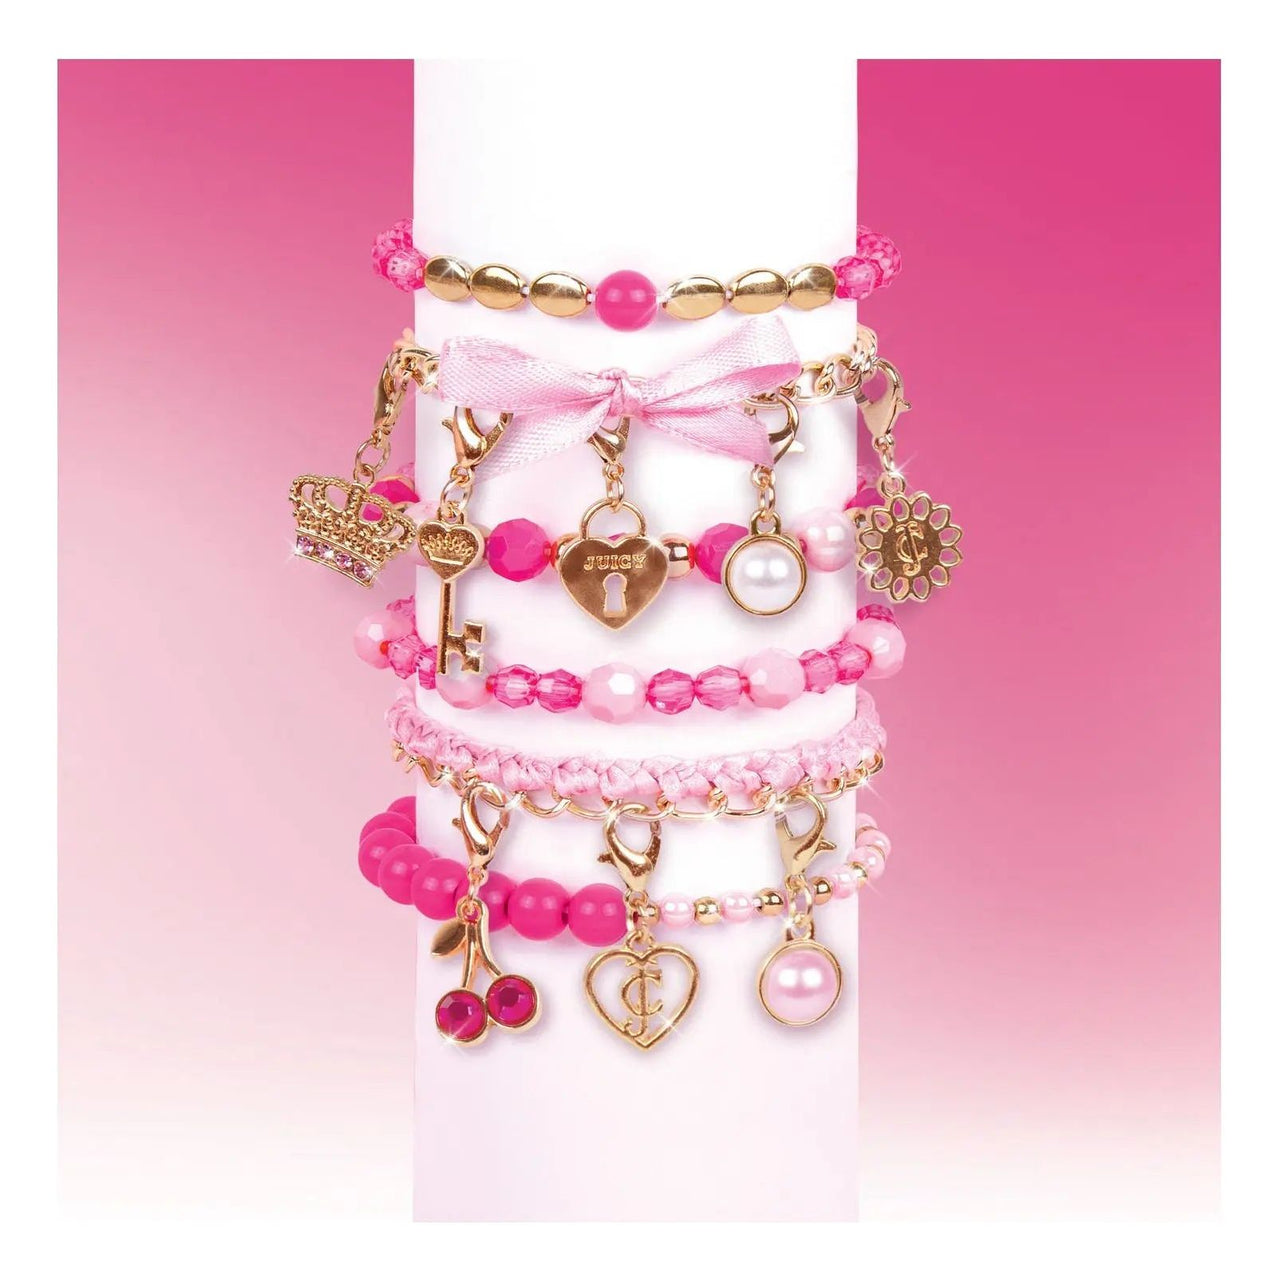 Juicy Couture Perfectly Pink Bracelets Make It Real